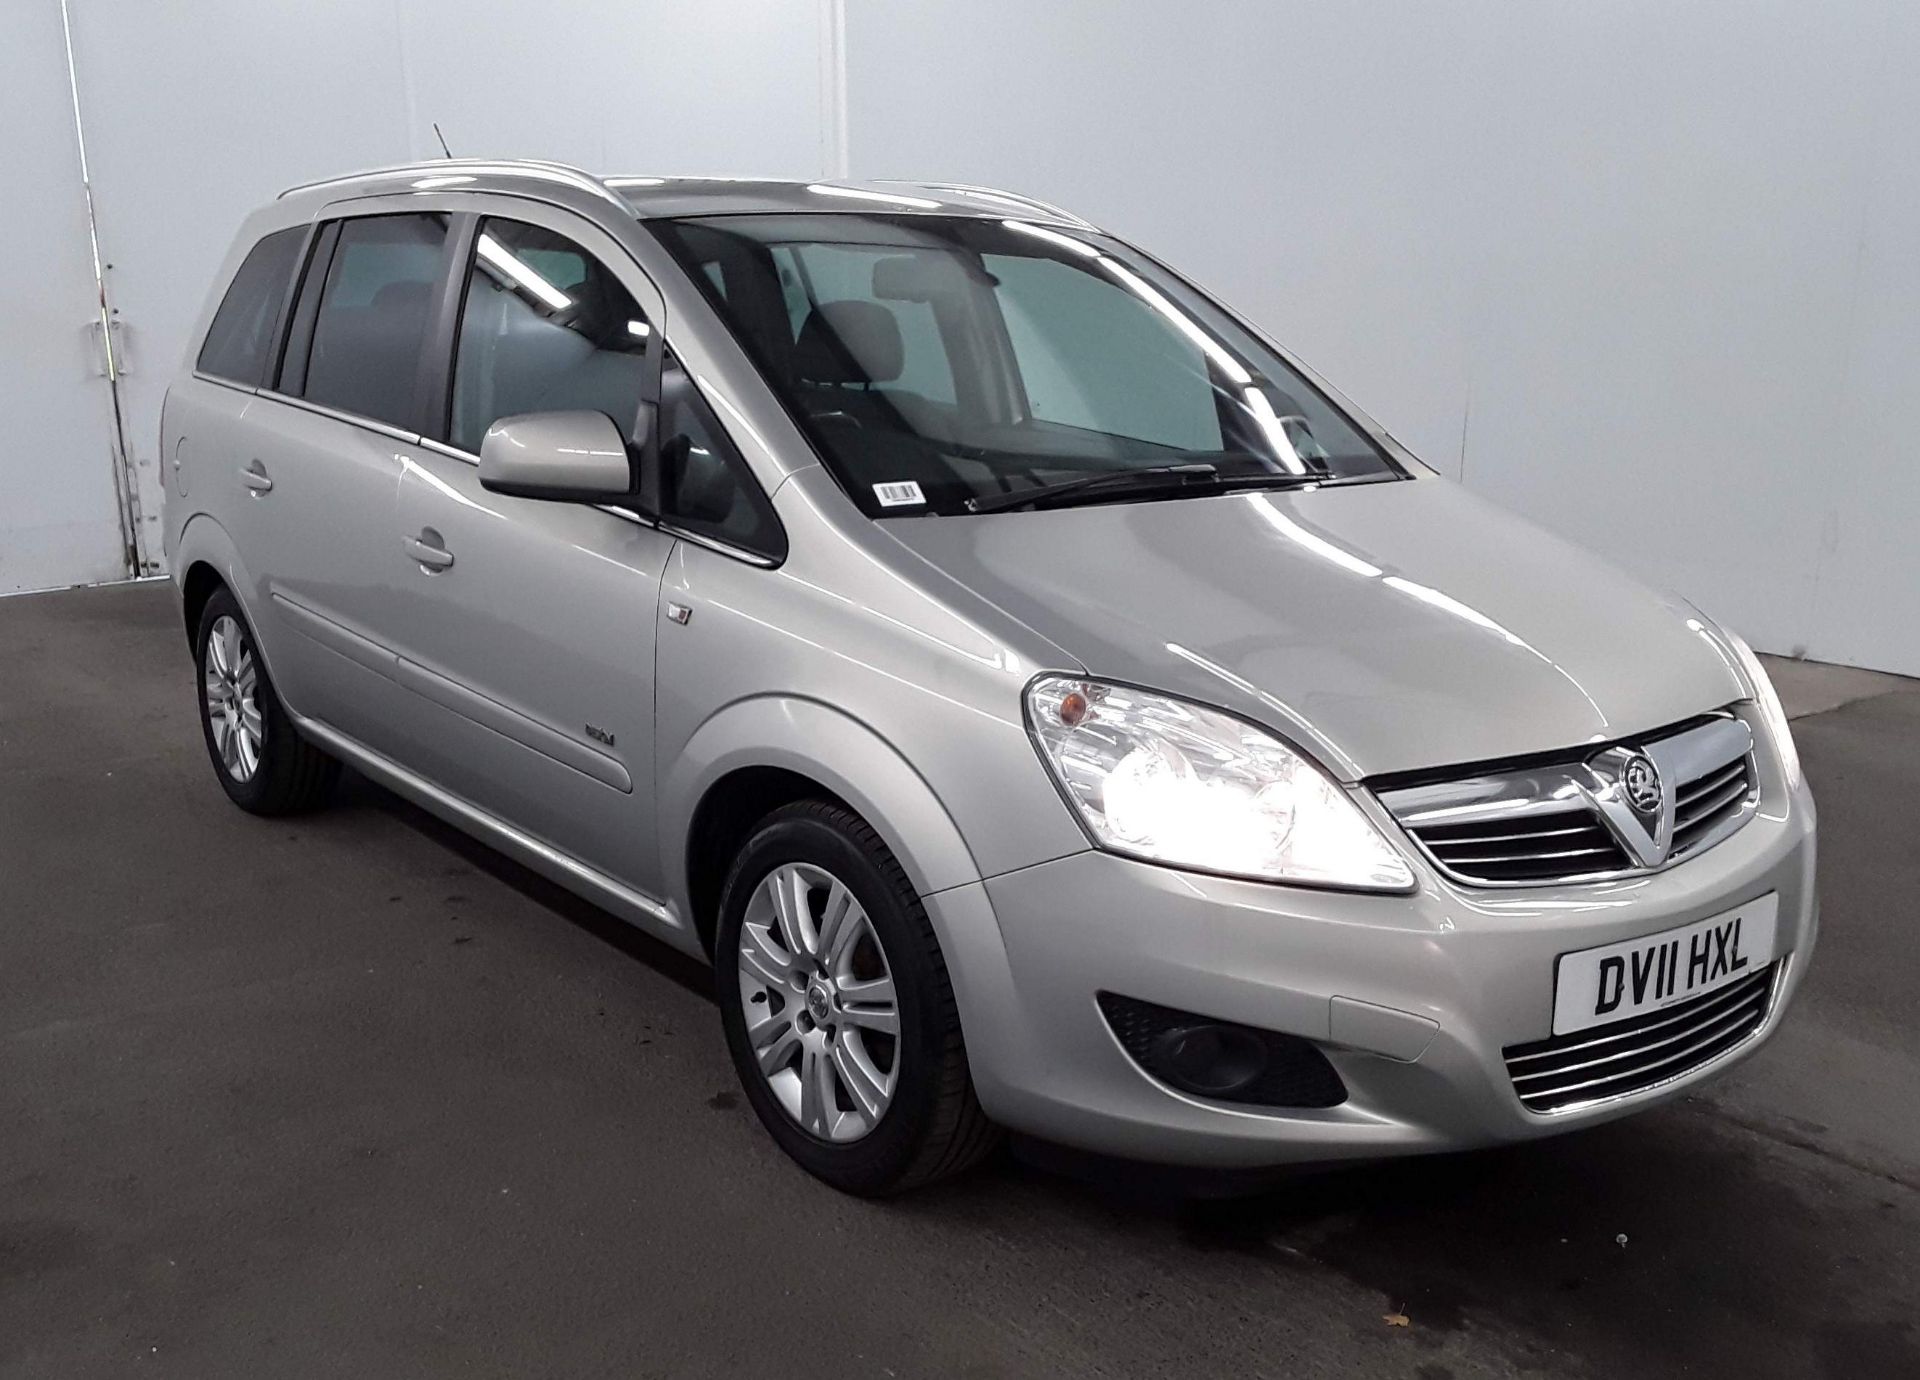 2011 Vauxhall Zafira 1.8 Design 5 Door MPV - CL505 - NO VAT ON THE HAMMER - Location: Corby - Image 6 of 12